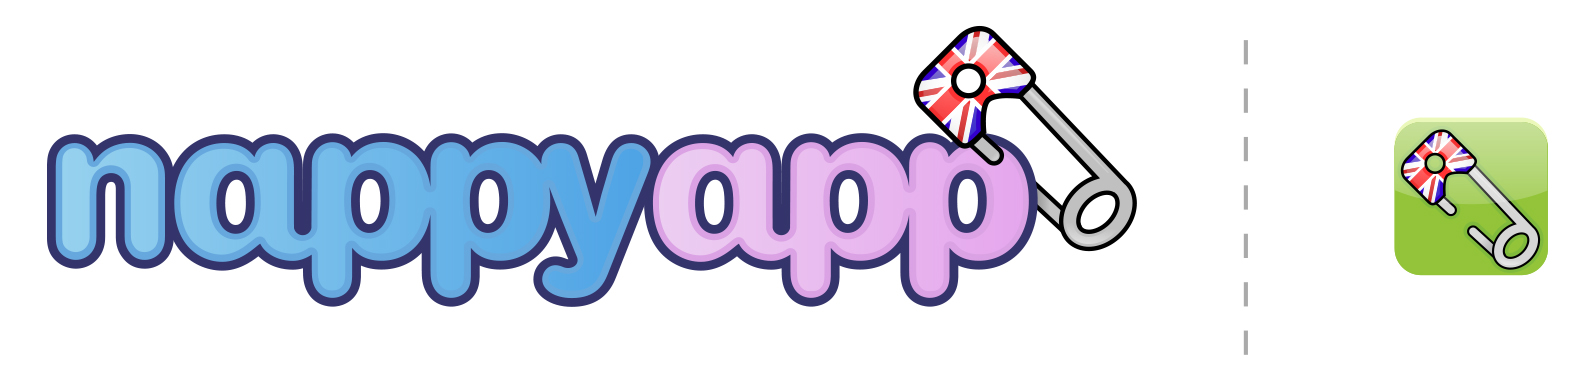 nappyapp, mobile technology, app, iphone, android, icon